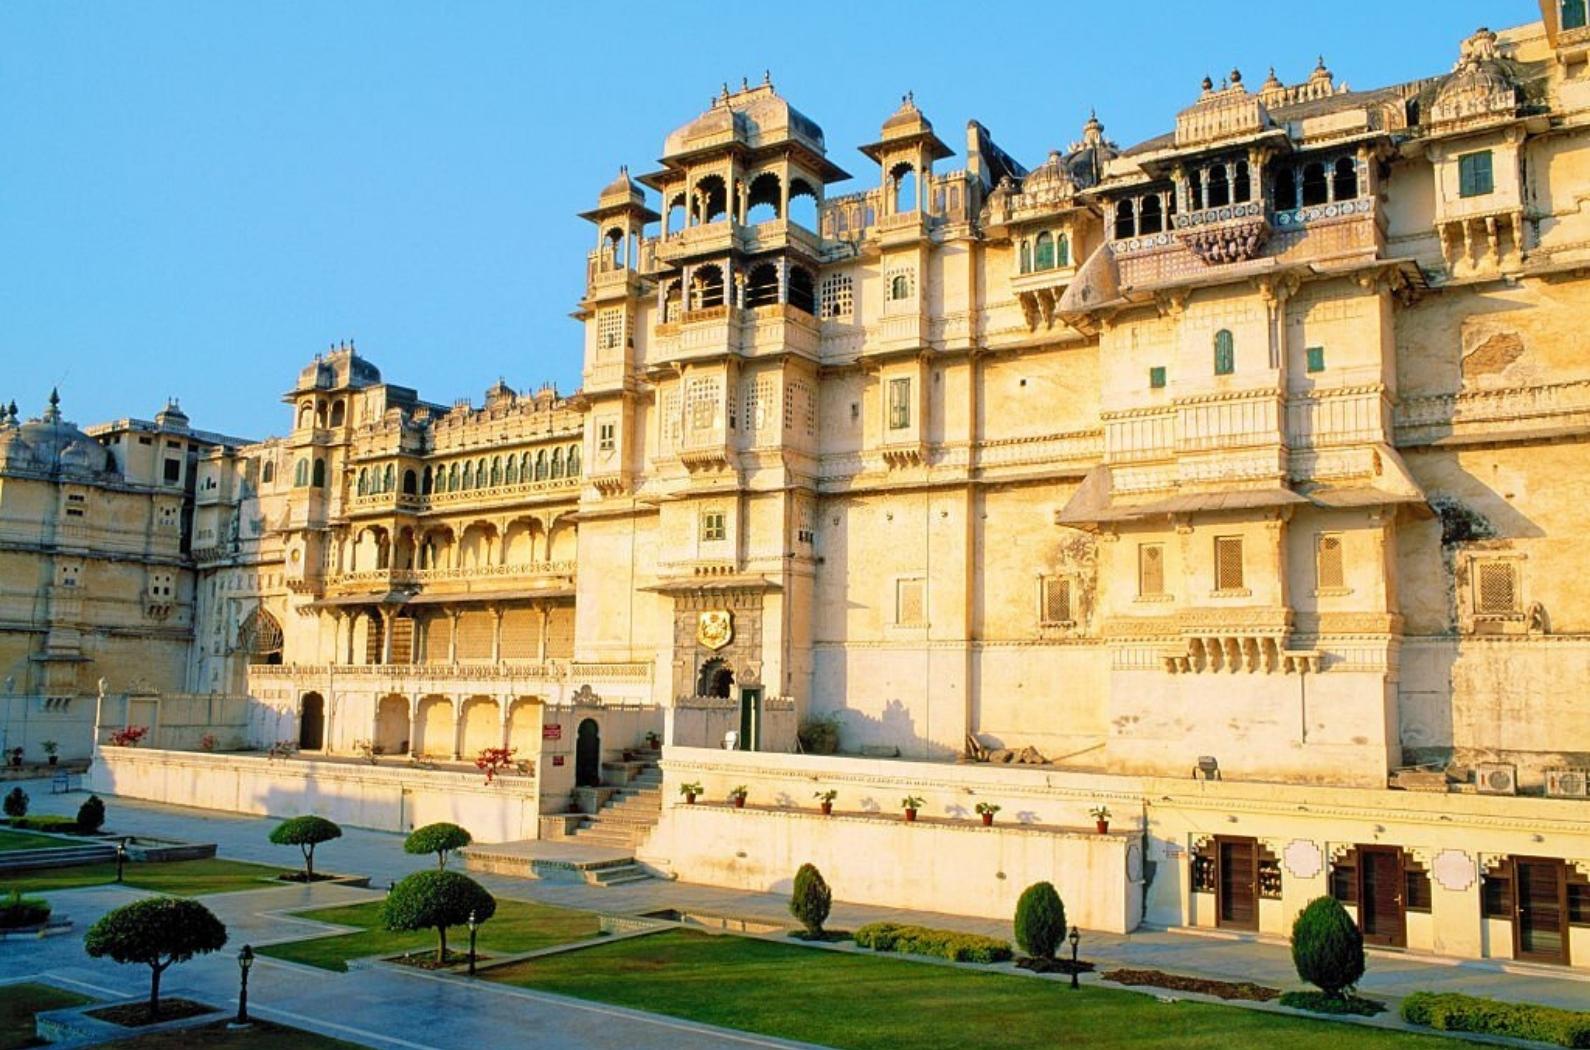 City Palace is a palace complex in Udaipur, in the Indian state Rajasthan. It was built by the Maharana Udai Singh as the capital of the Sisodia Rajput clan in 1559, after he moved from Chittor. It is located on the east bank of the Lake.